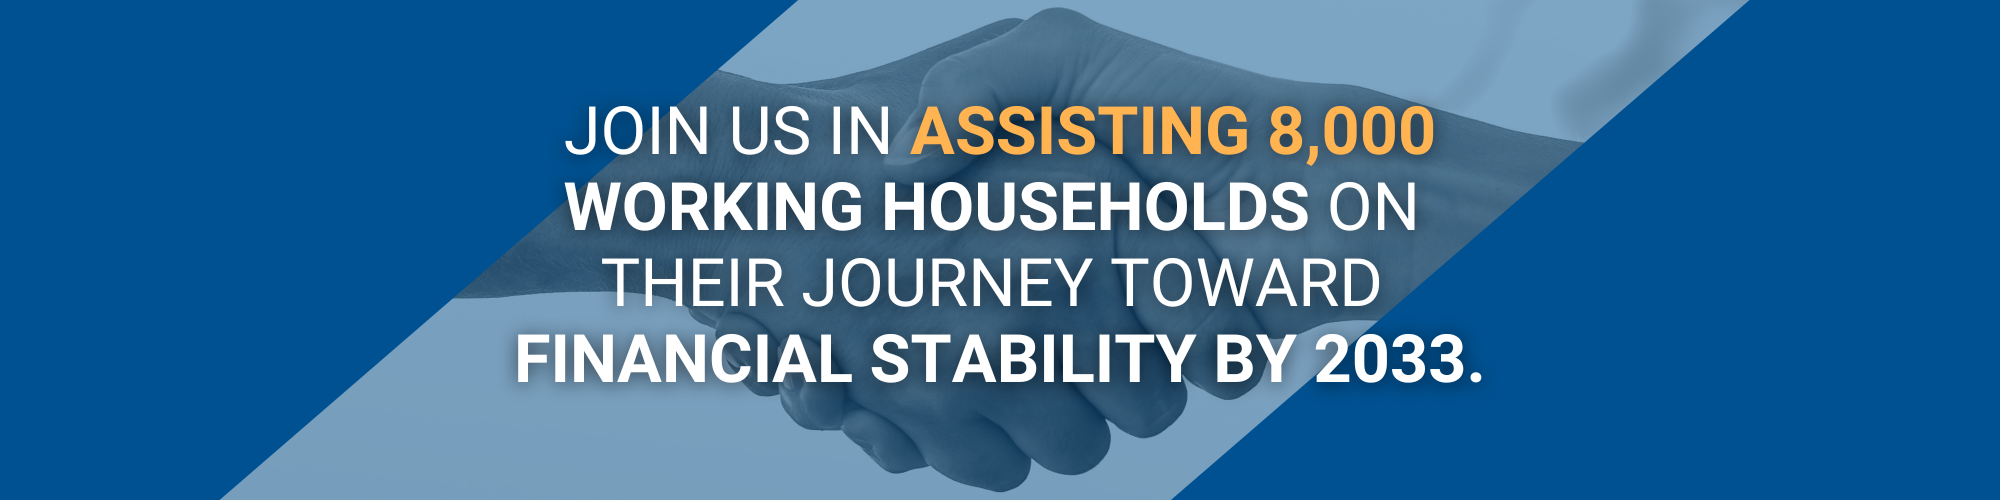 Join us in assisting 8,000 working households on their journey toward financial stability by 2033.